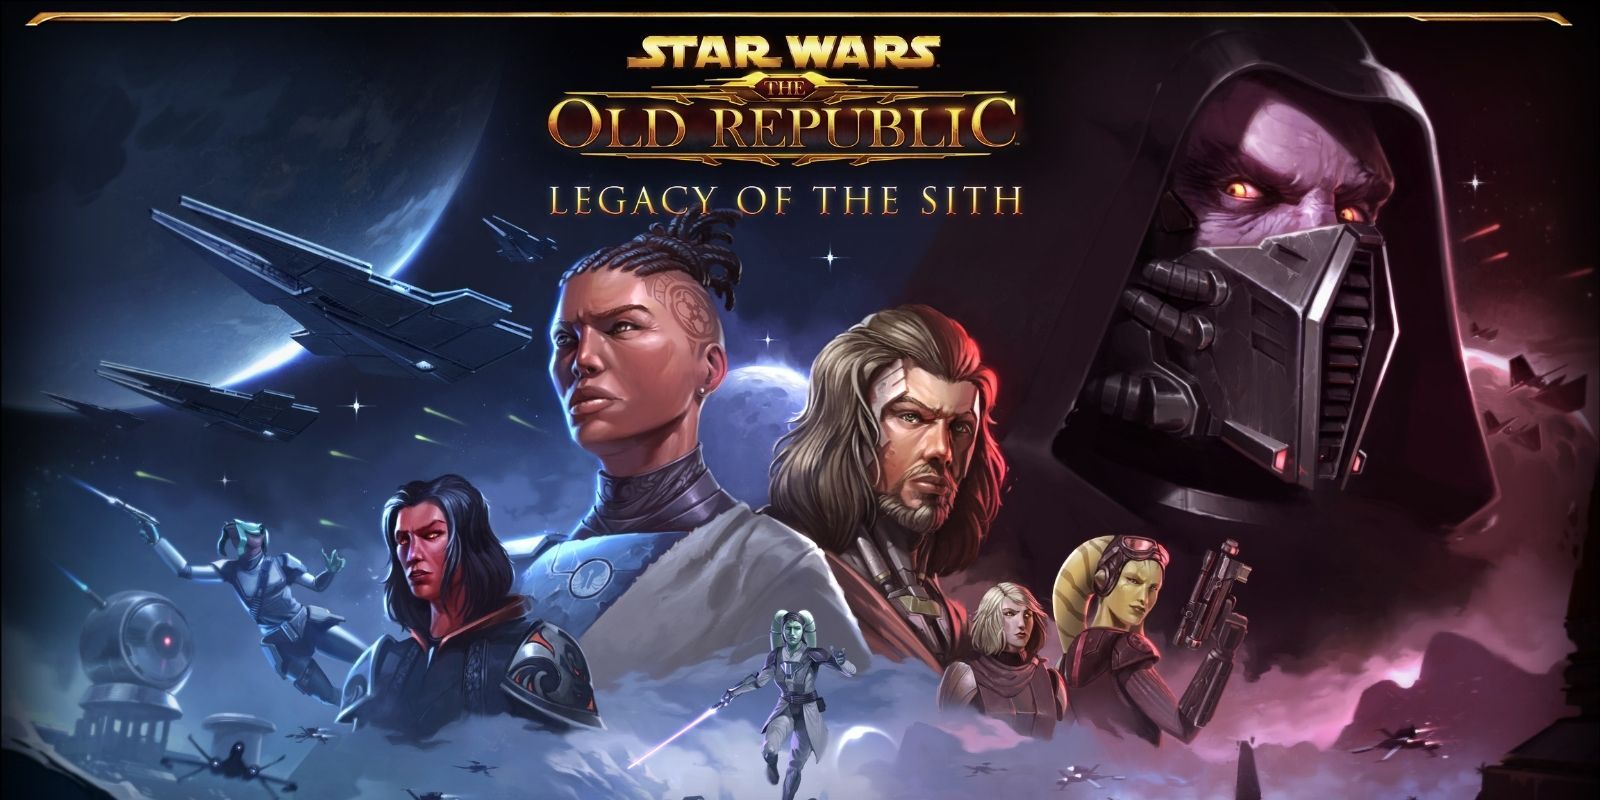 Key art for Star Wars: The Old Republic - Legacy of the Sith